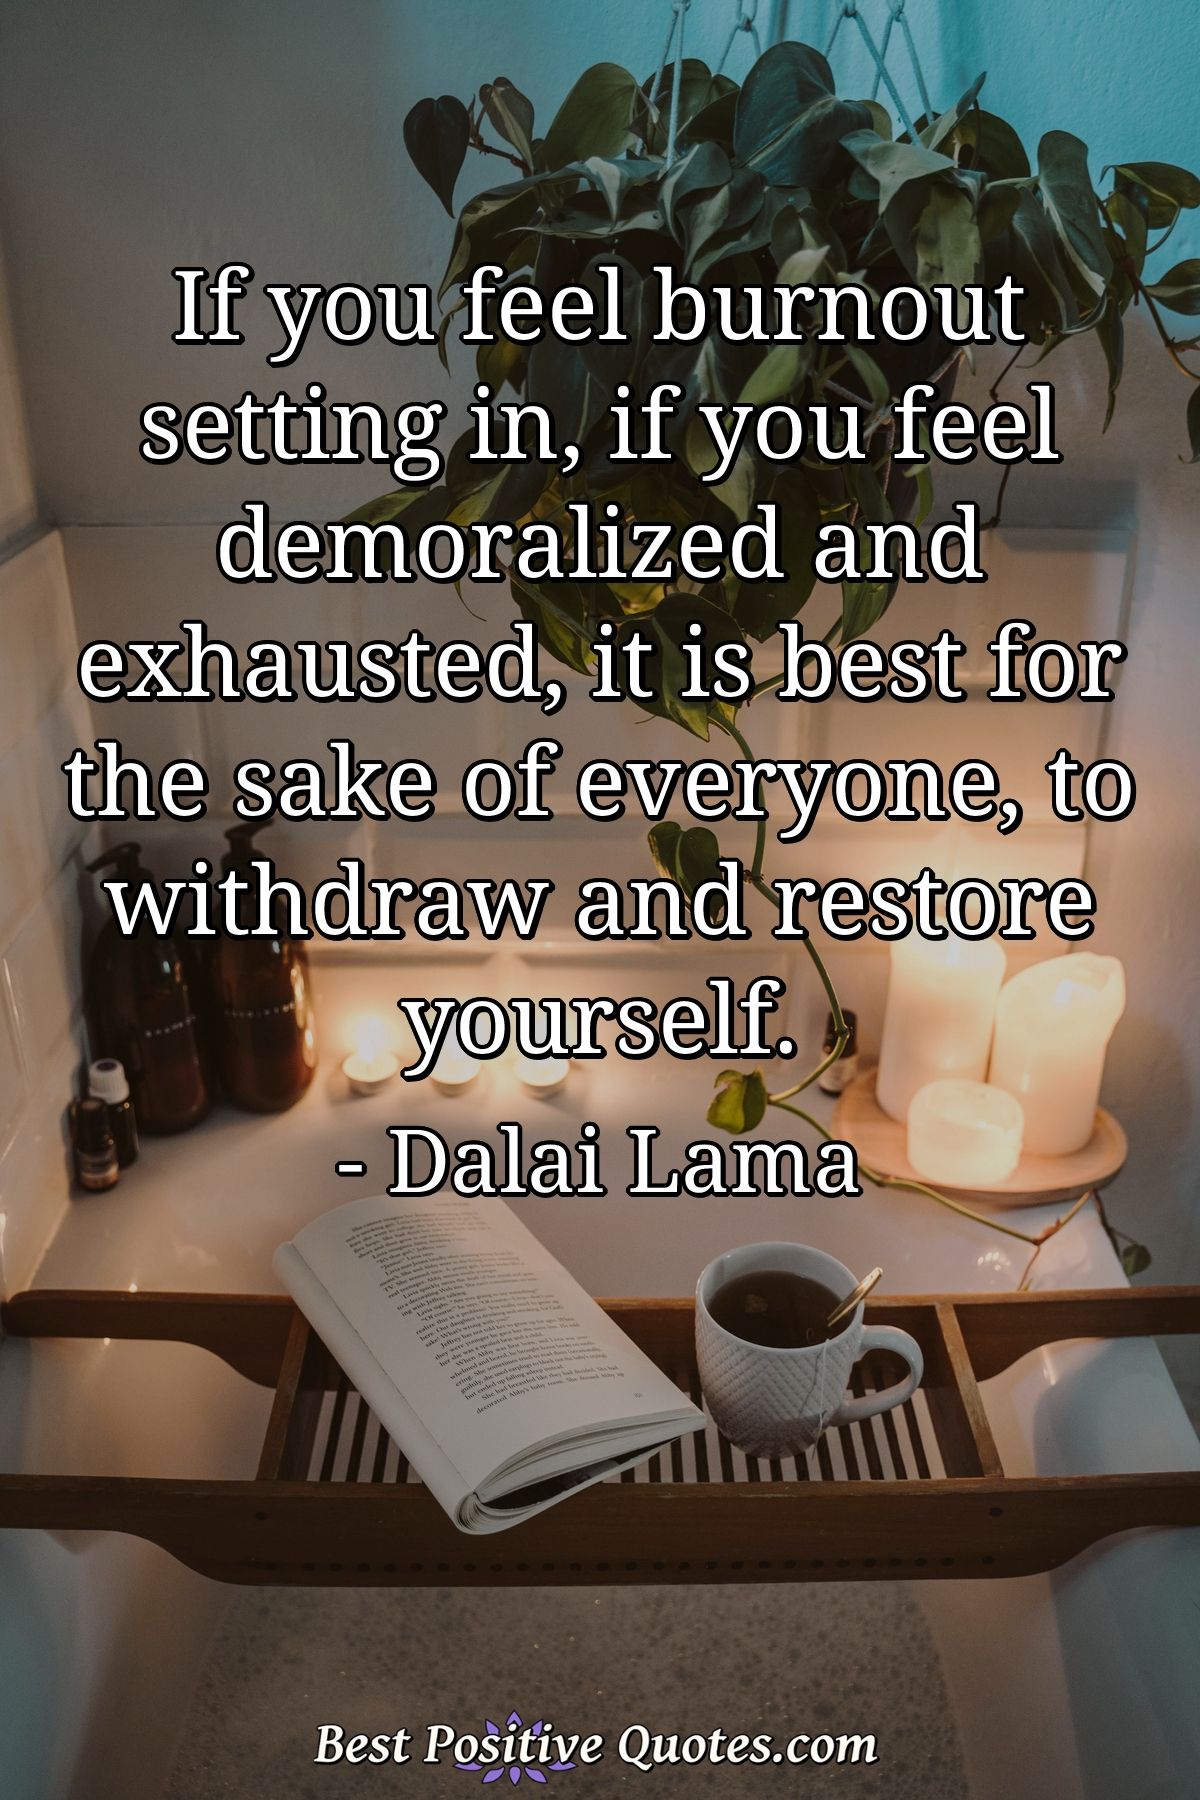 If you feel burnout setting in, if you feel demoralized and exhausted, it is best for the sake of everyone, to withdraw and restore yourself. - Dalai Lama